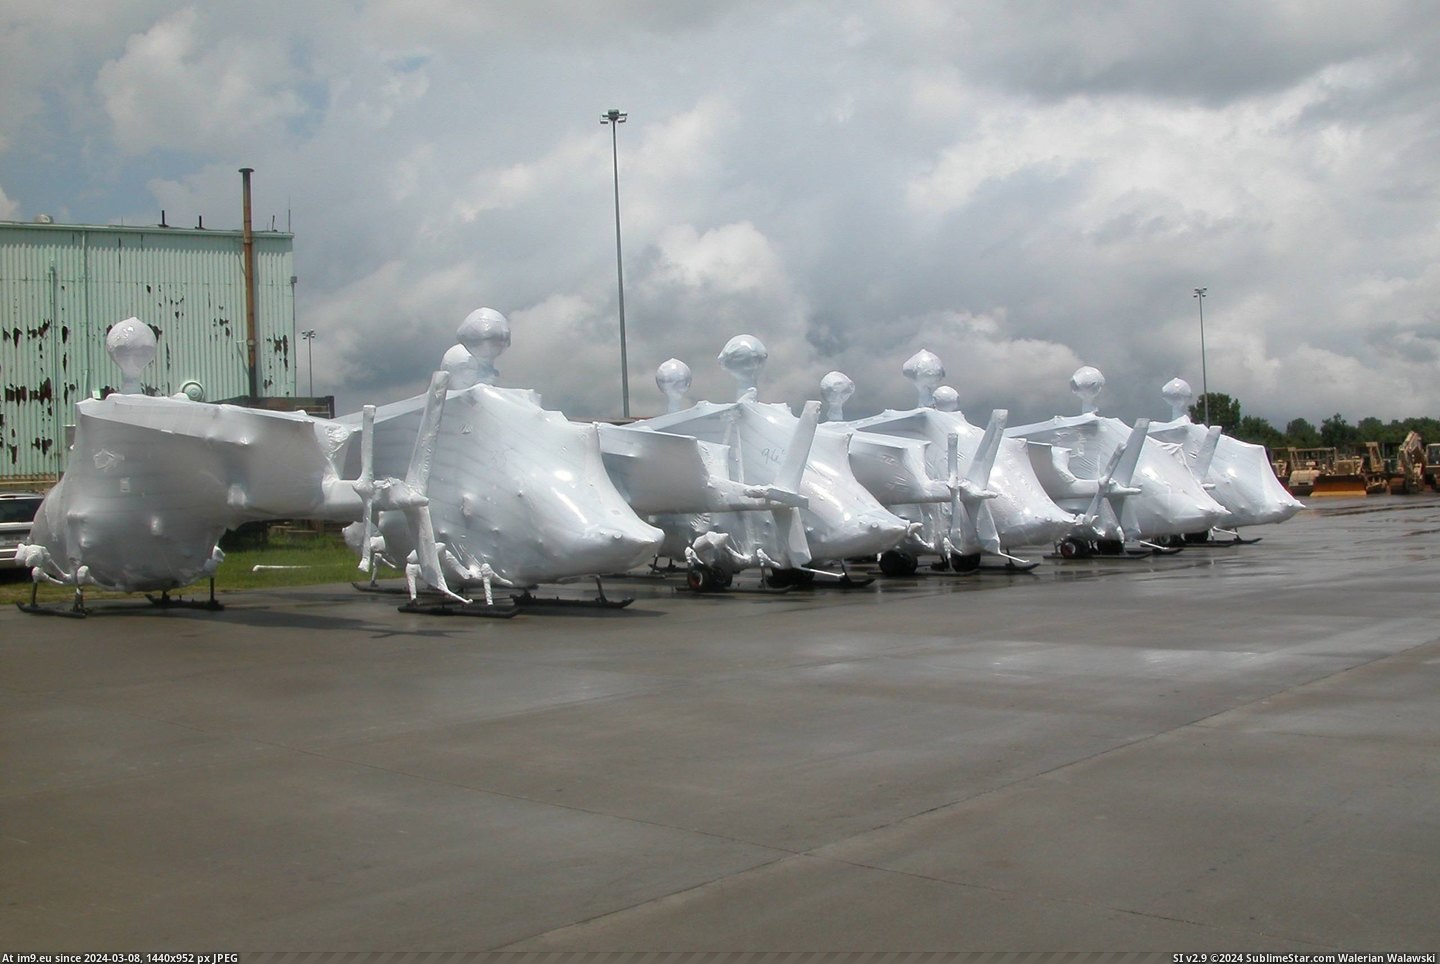 #Wrapped #Iraq #Shrink #Kiowa #Helicopters #Shipped [Mildlyinteresting] Shrink wrapped OH-58 Kiowa helicopters being shipped to Iraq. Pic. (Изображение из альбом My r/MILDLYINTERESTING favs))